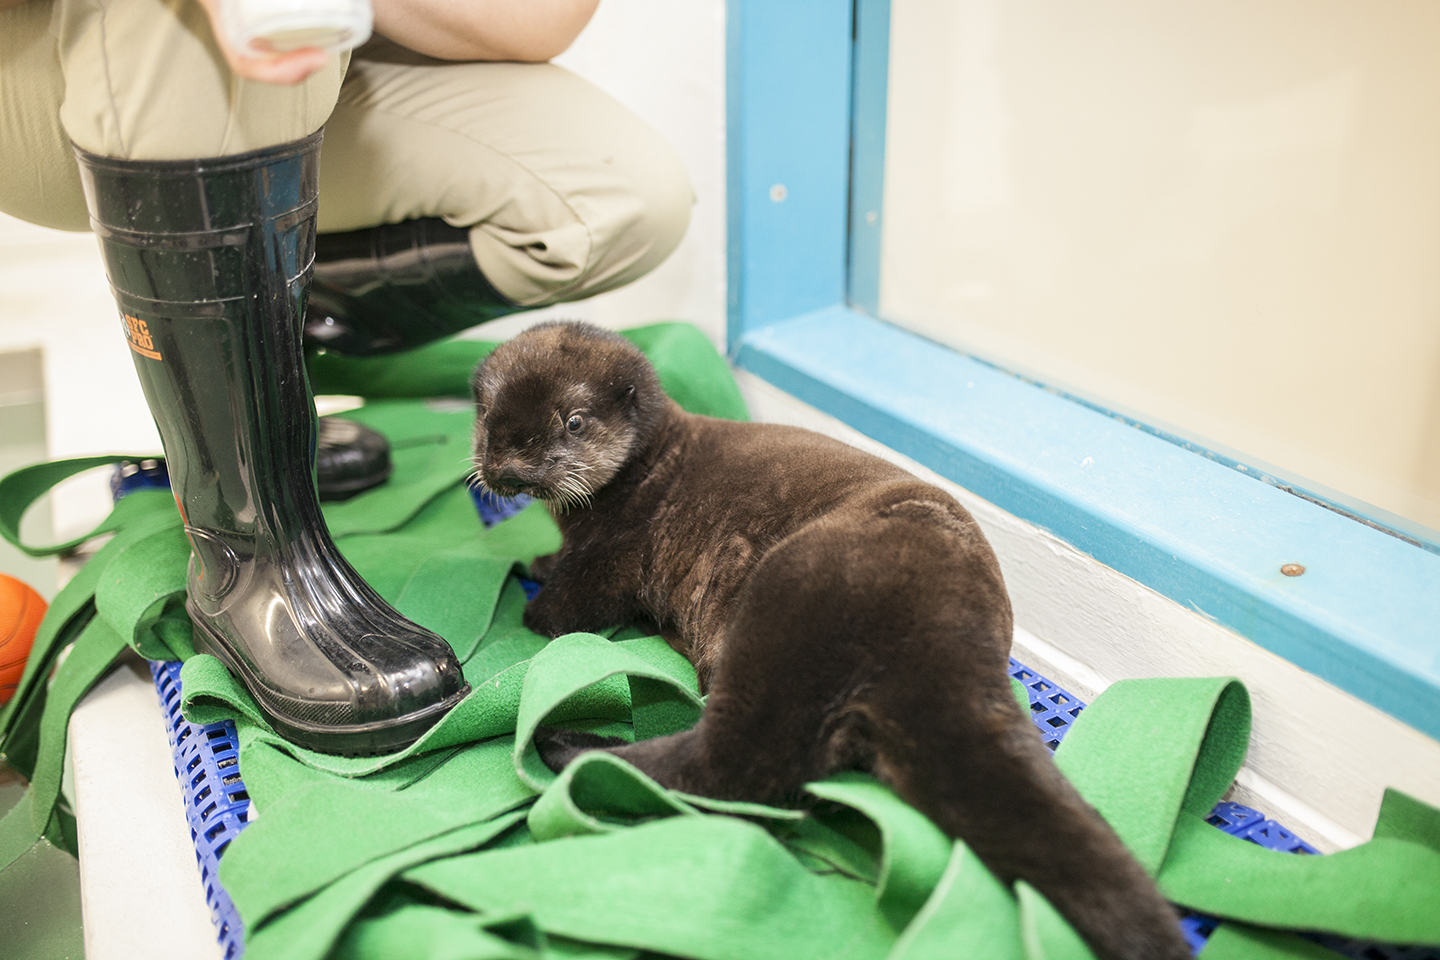 PHOTO: The orphaned sea otter pup at Chicago's Shedd Aquarium officially has a name: Luna, derived from California's Half Moon Bay, near the beach where she was rescued.